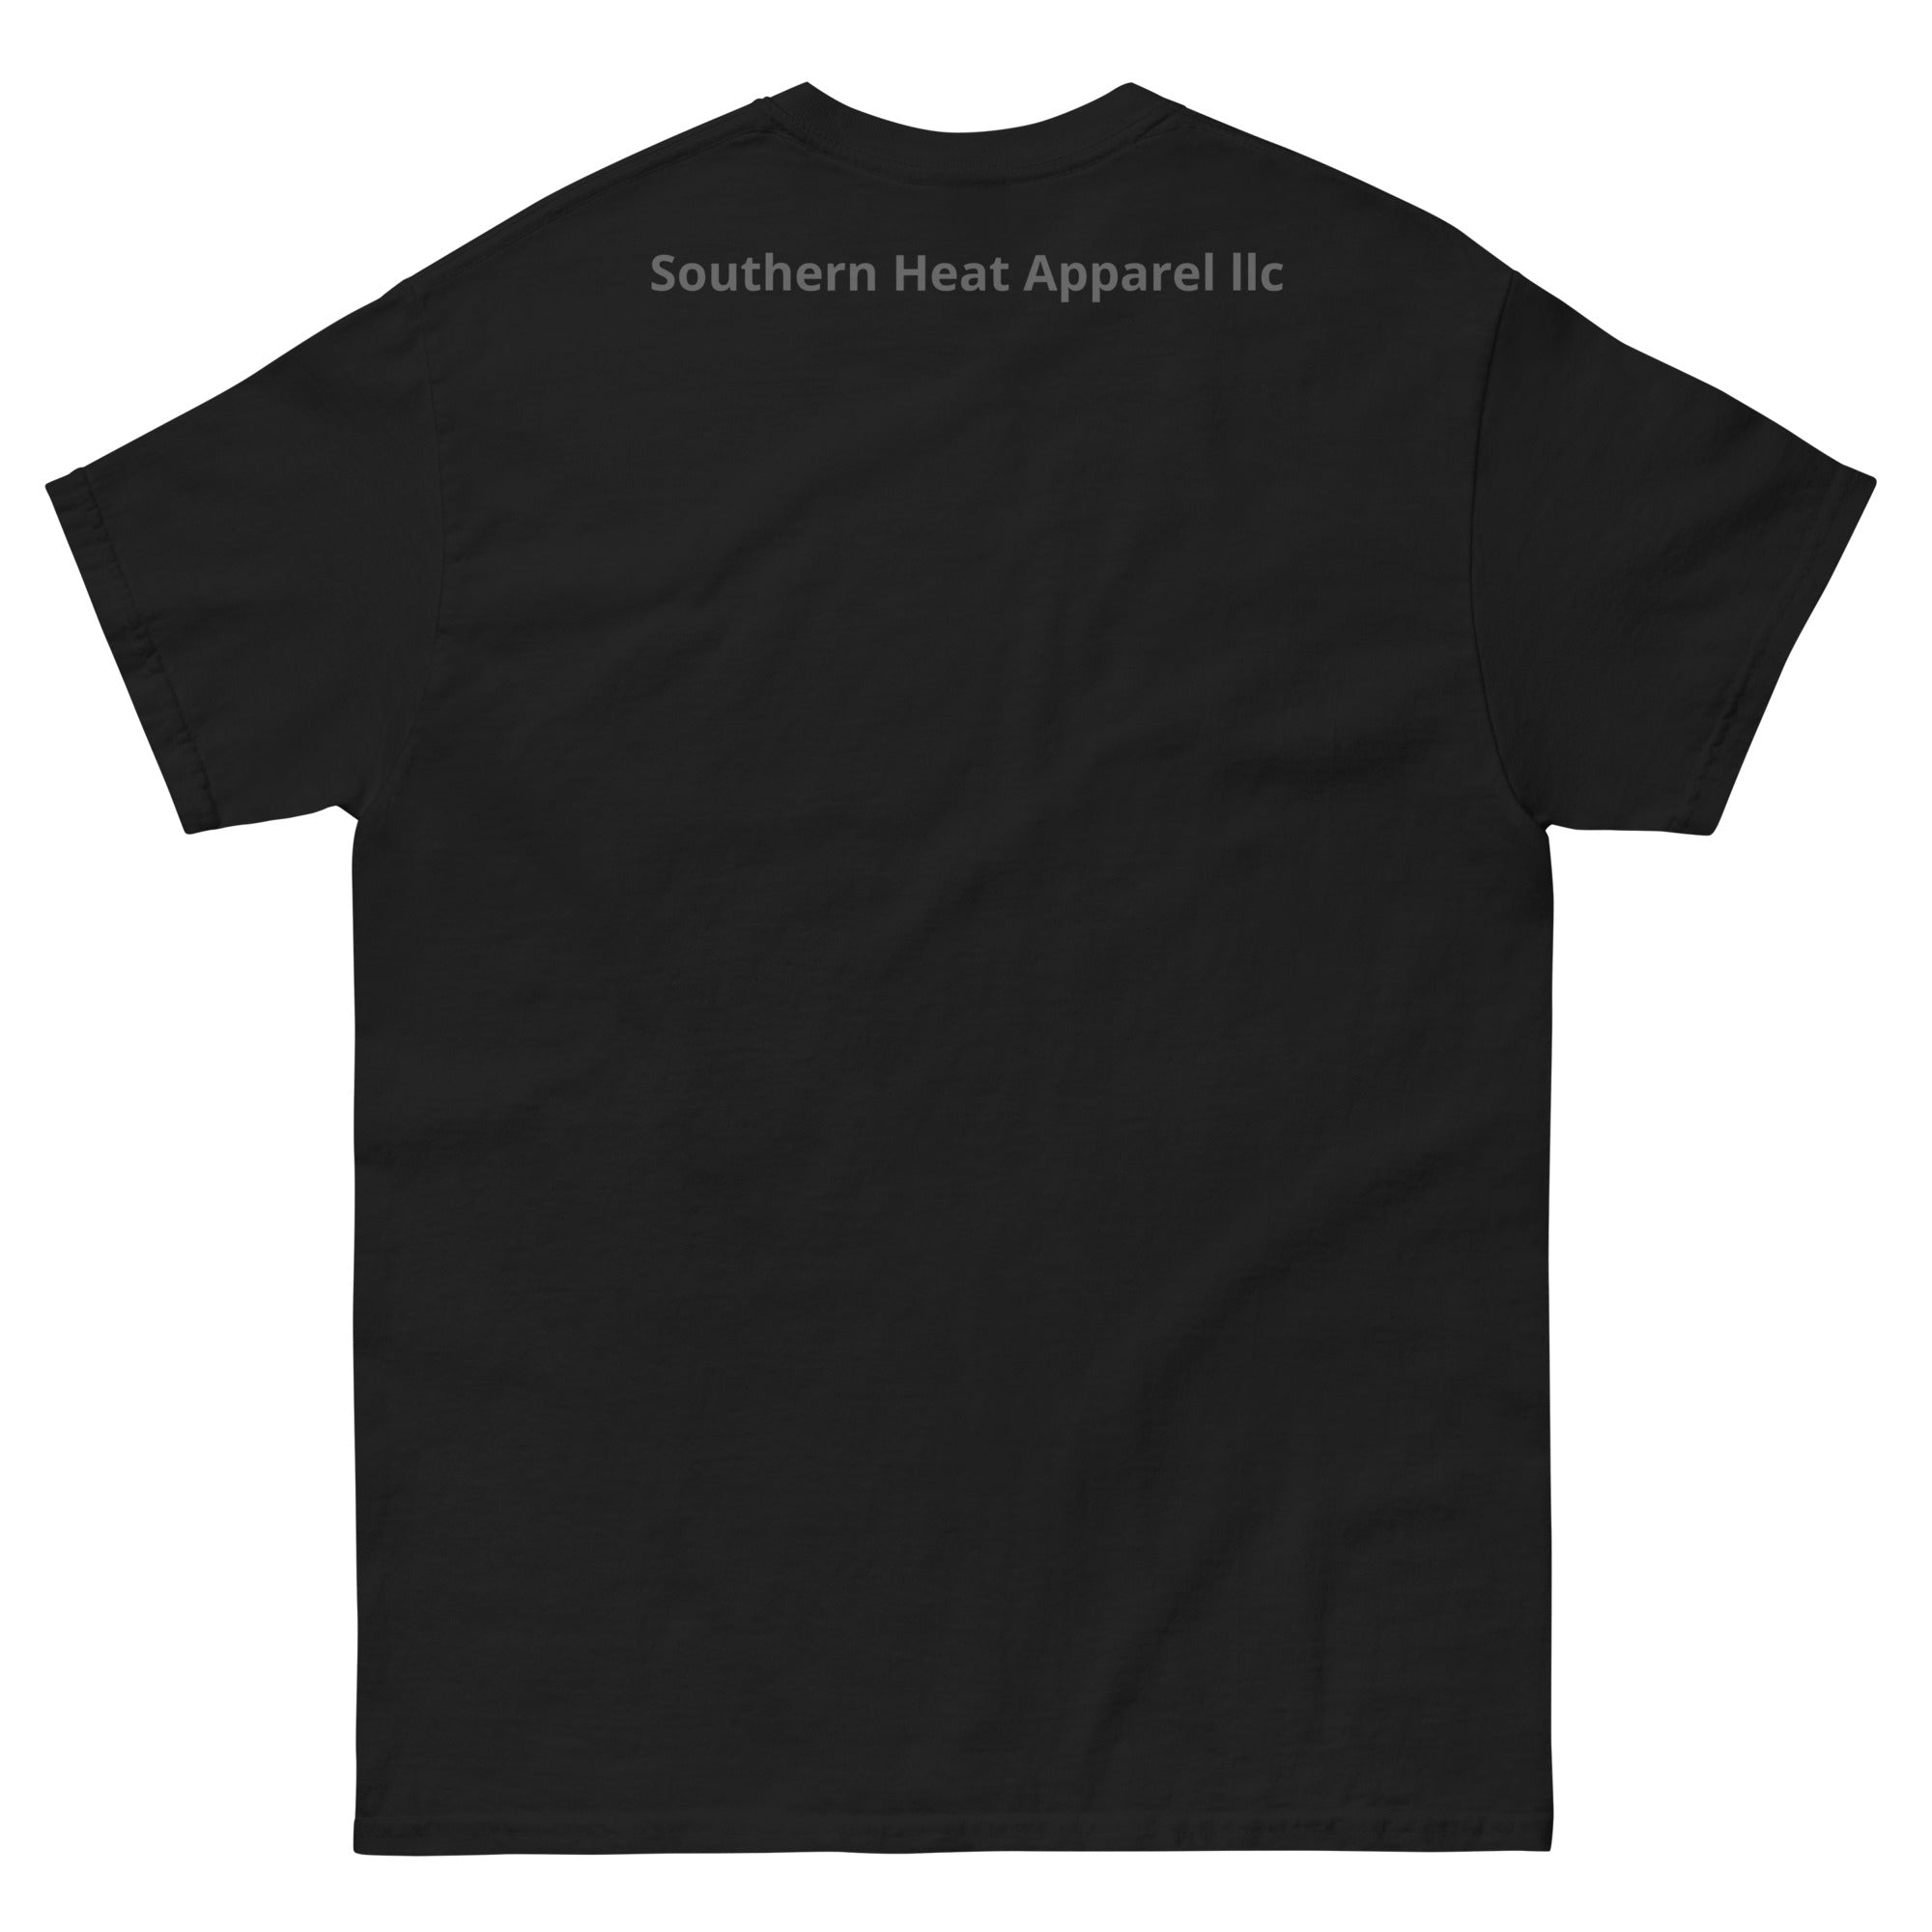 Kindness is contagious-Men's classic tee